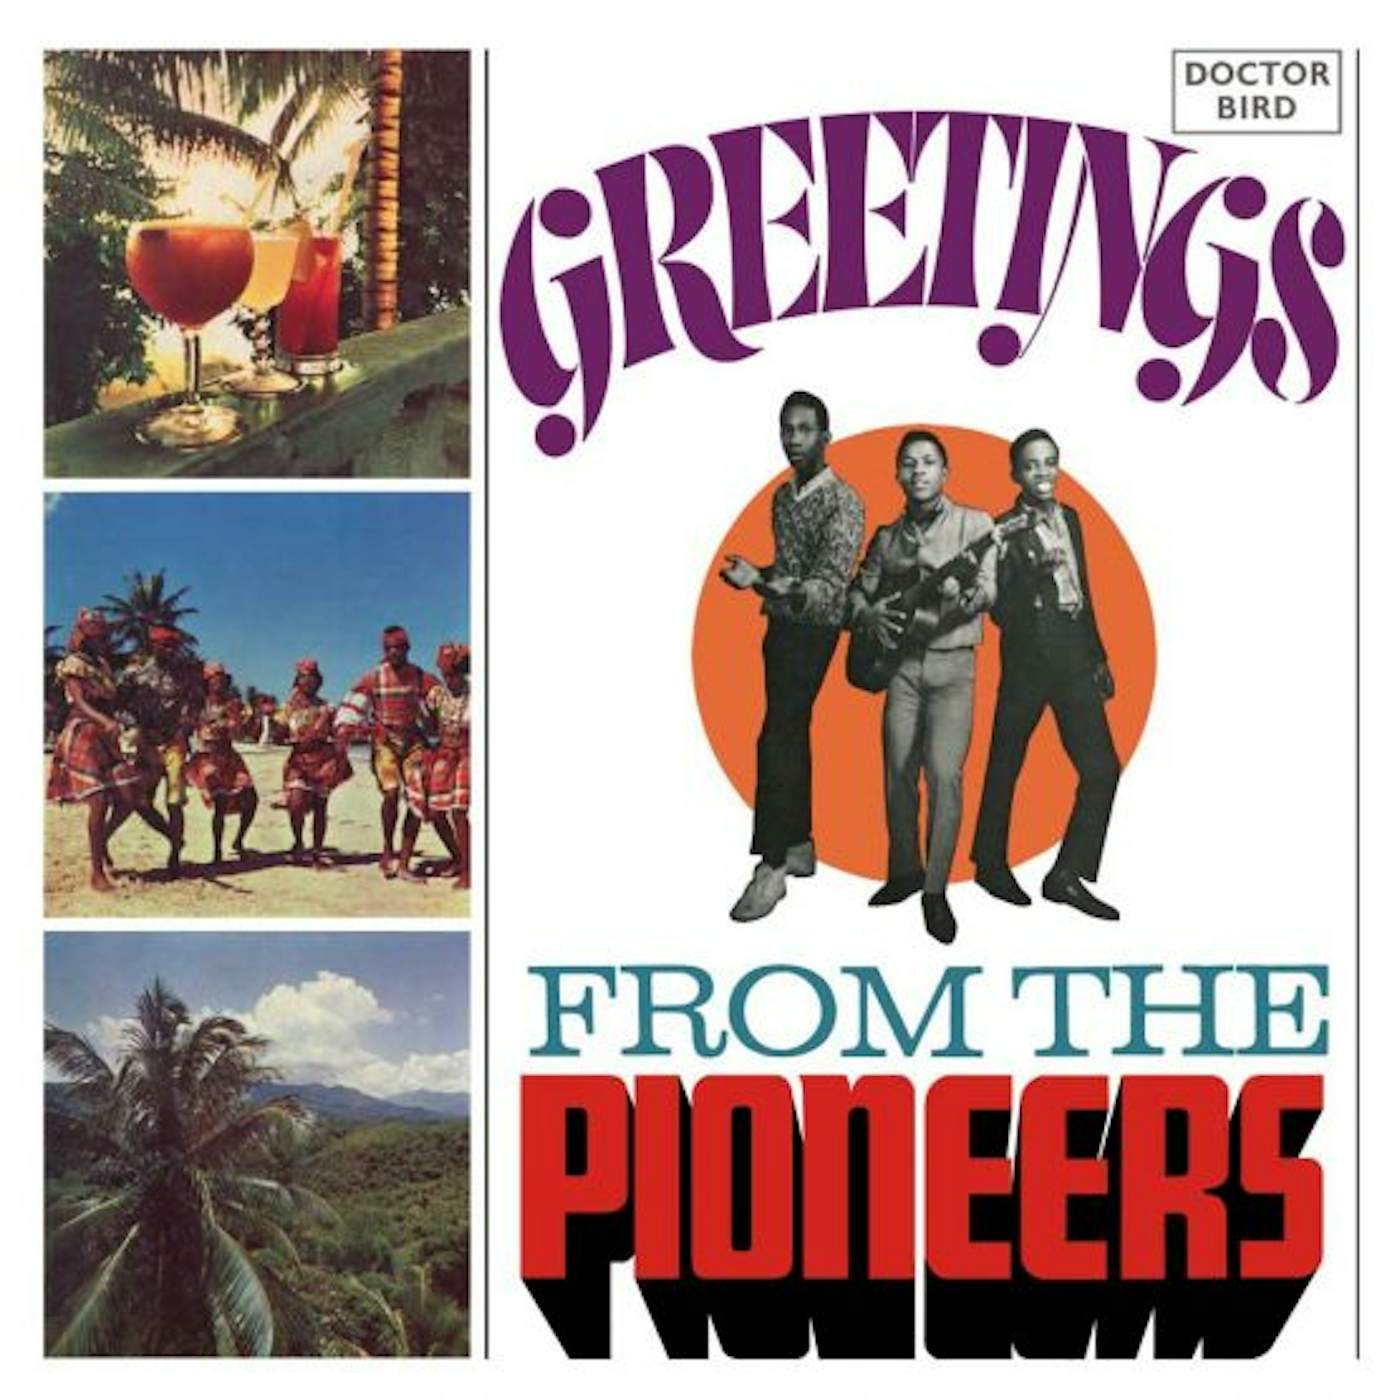 GREETINGS FROM THE PIONEERS: EXPANDED ORIGINAL CD